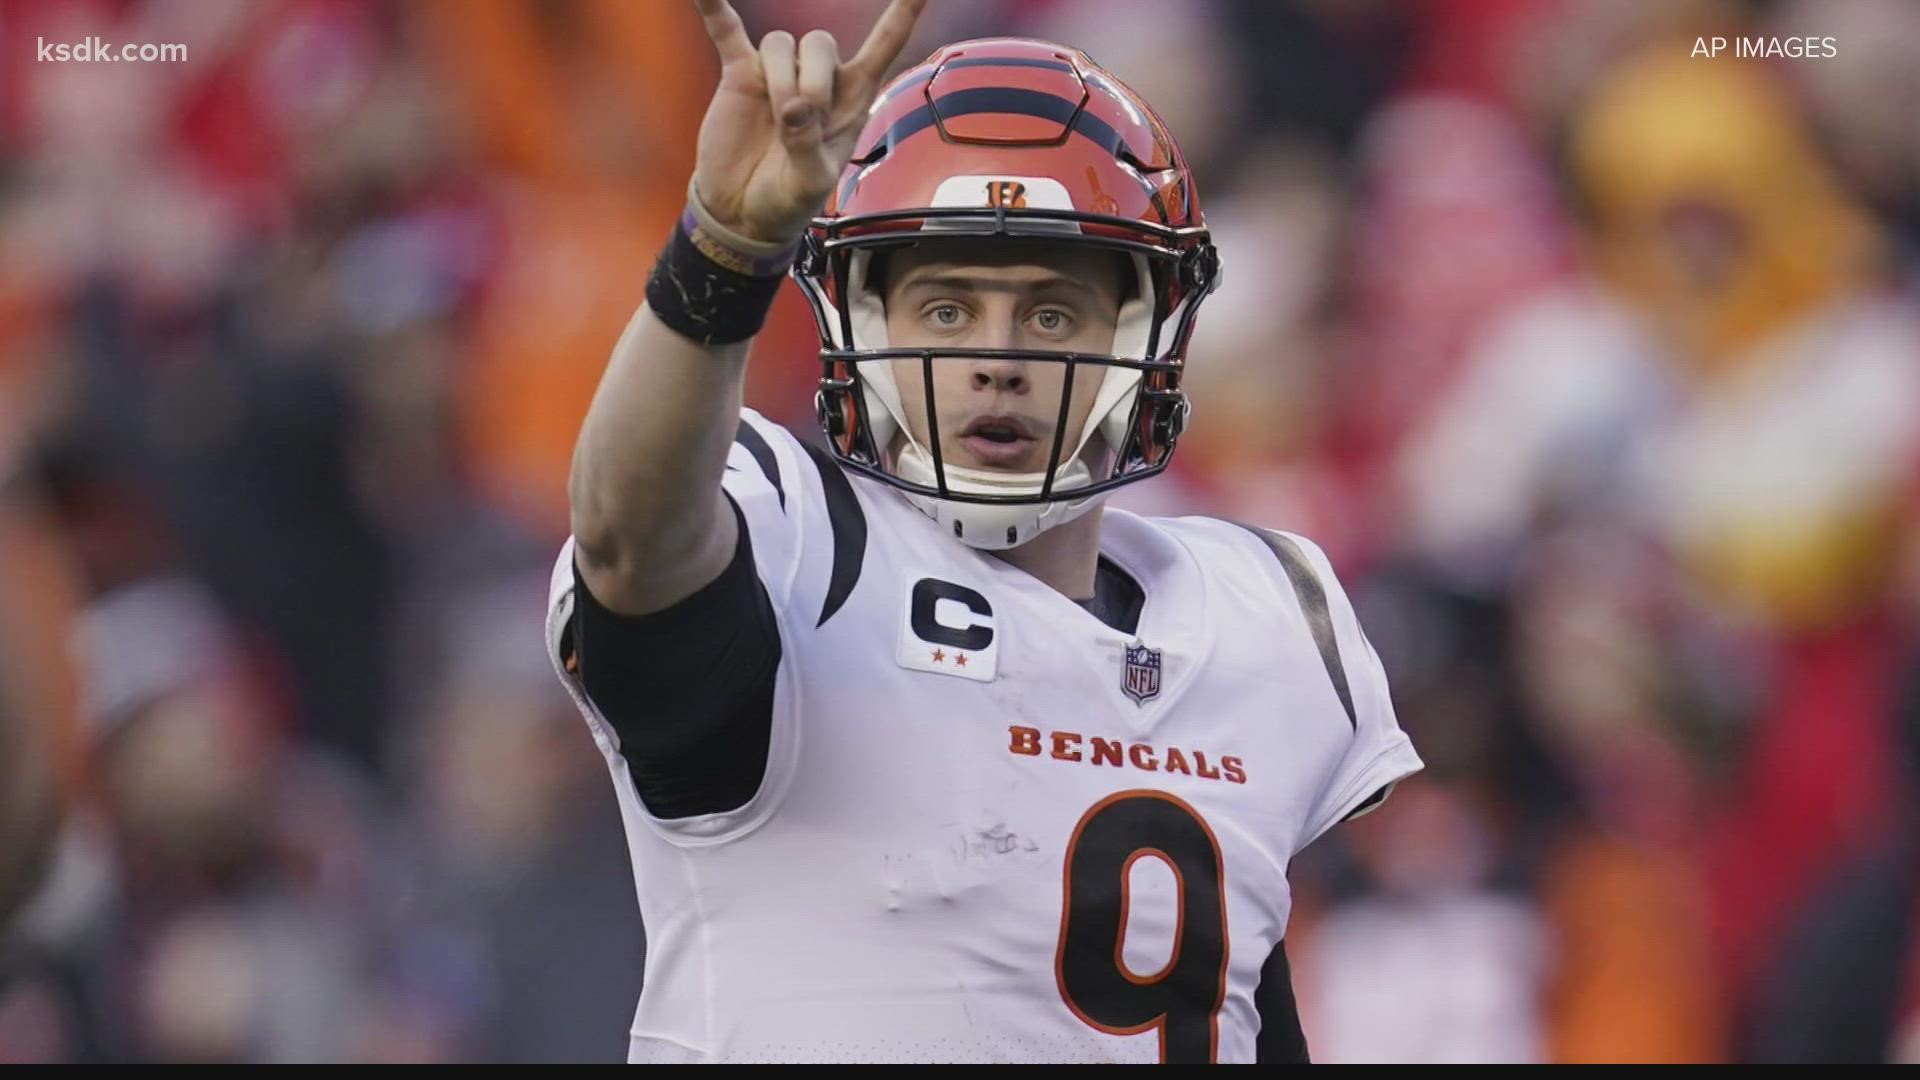 $1 million Super Bowl bet placed on Bengals at STL area casino